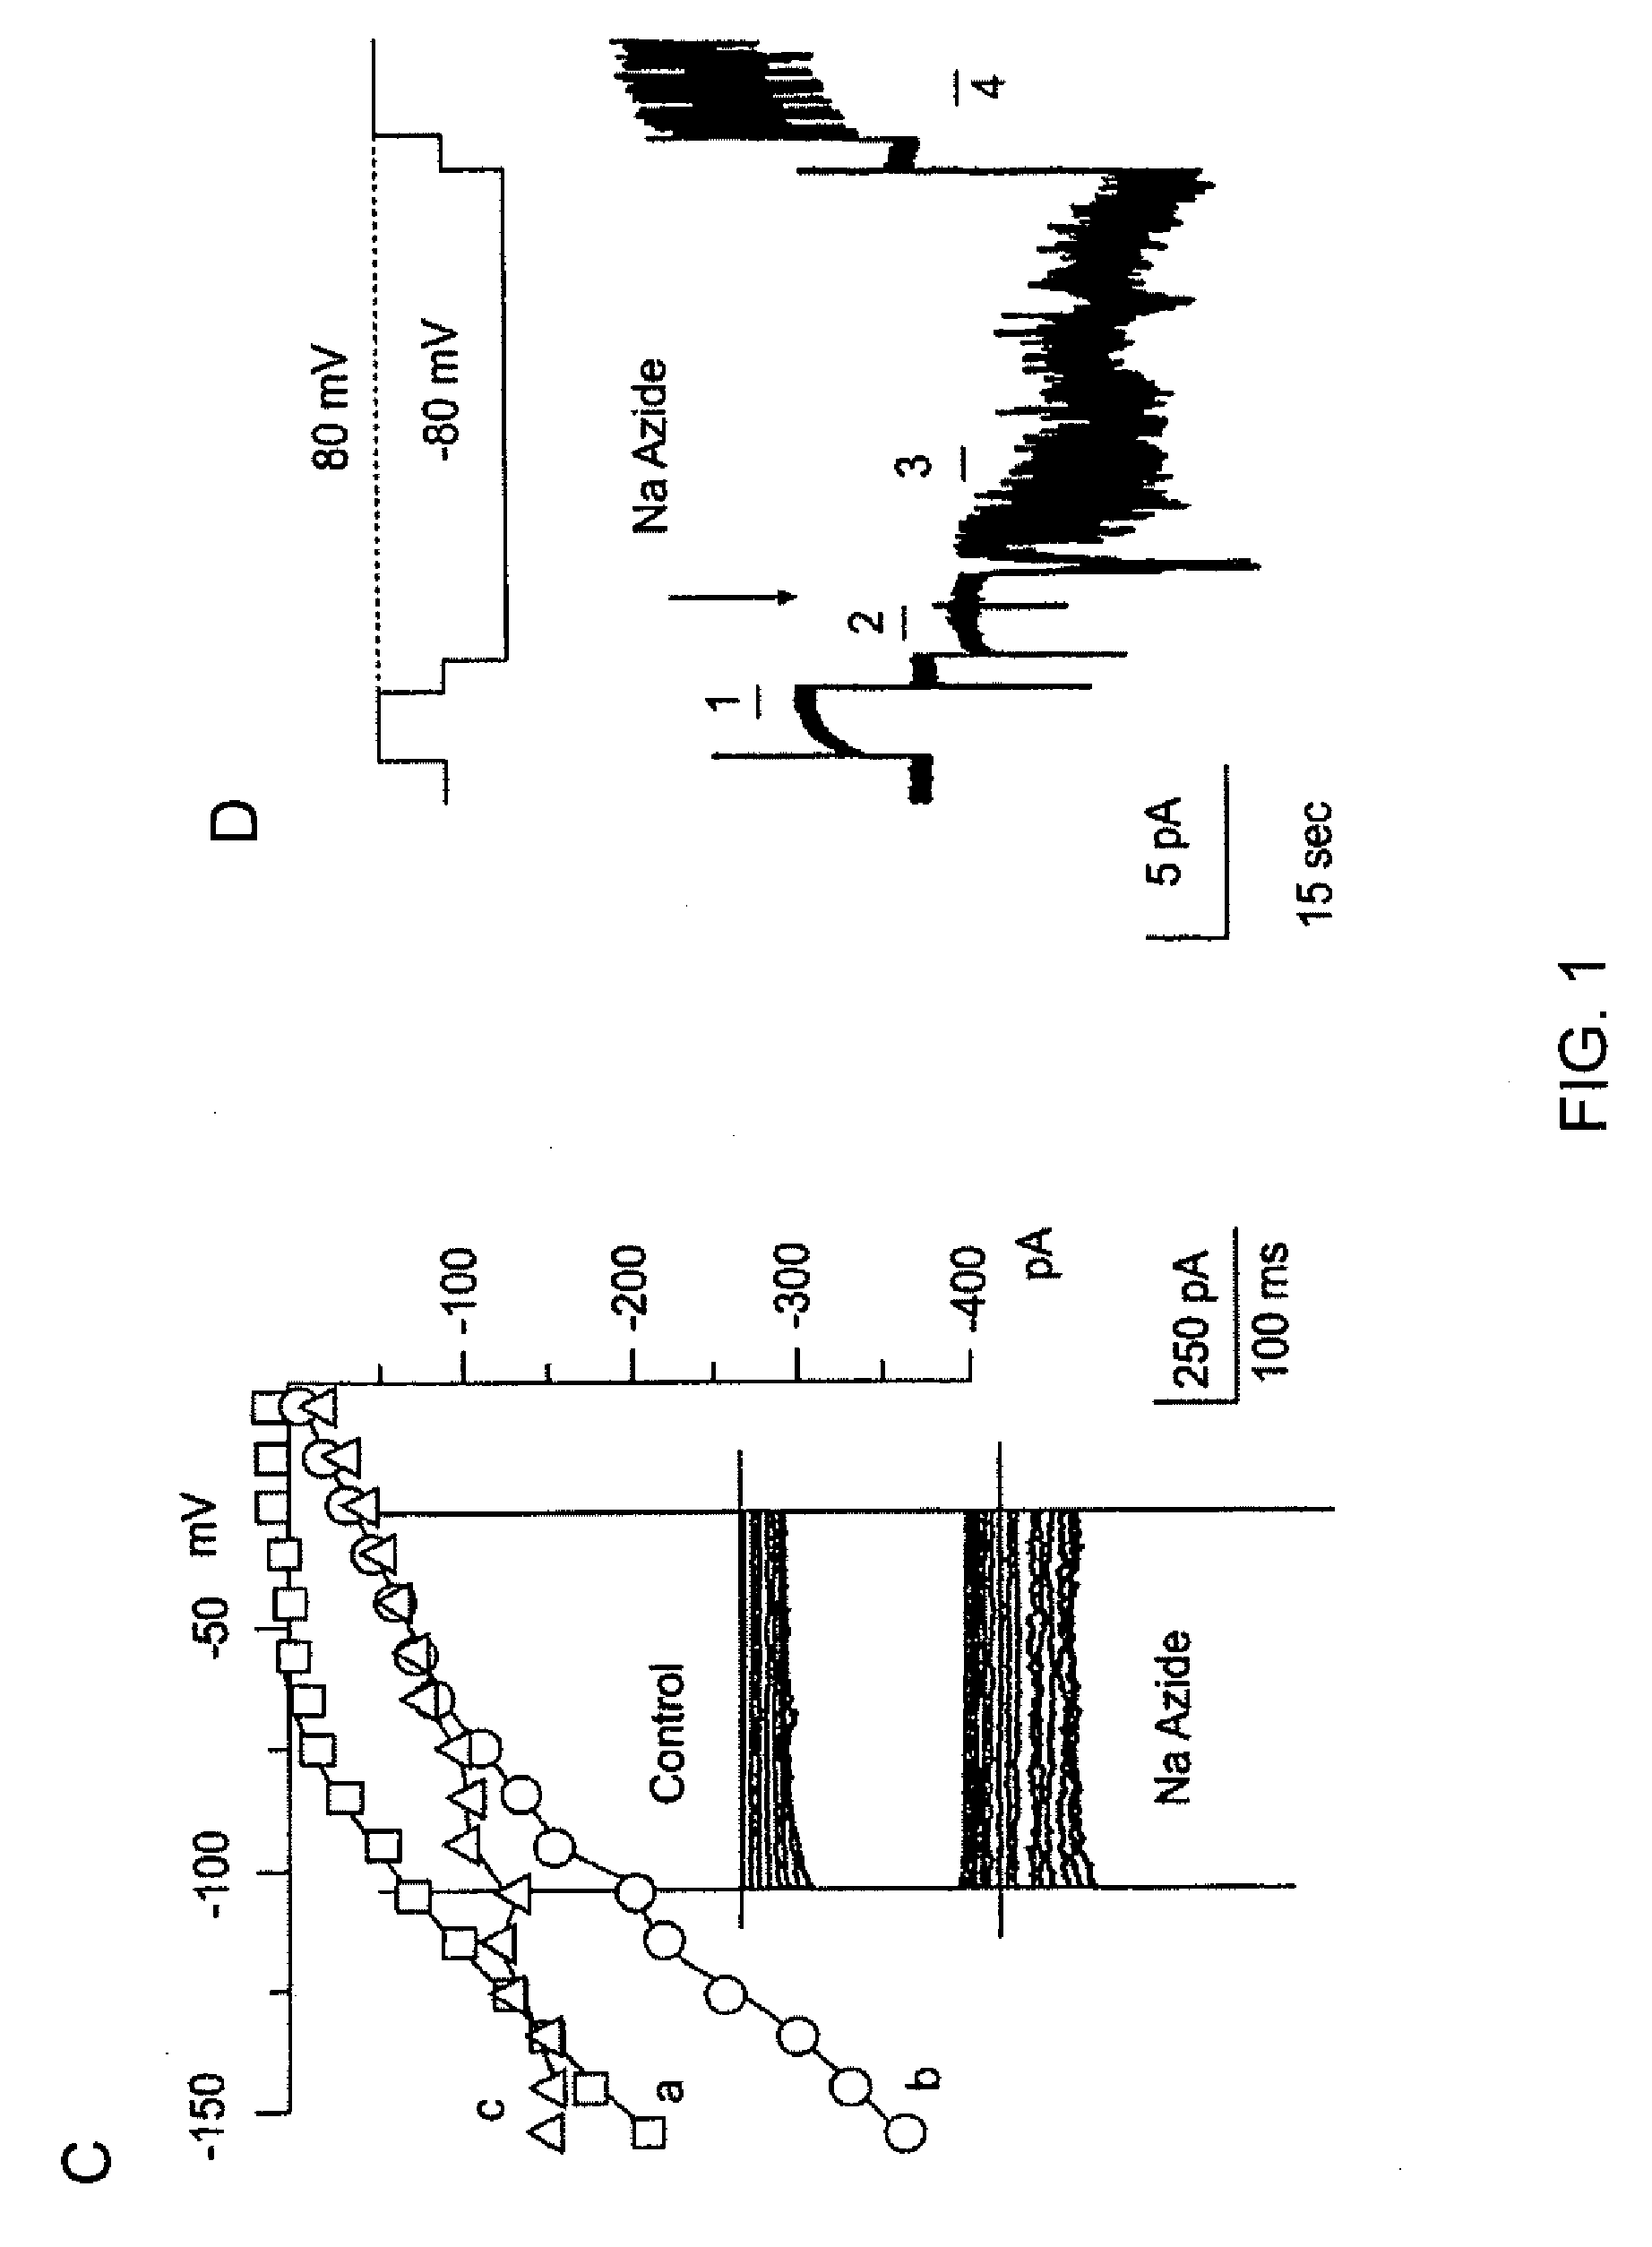 Novel non-selective cation channel in neuronal cells and method for treating brain swelling